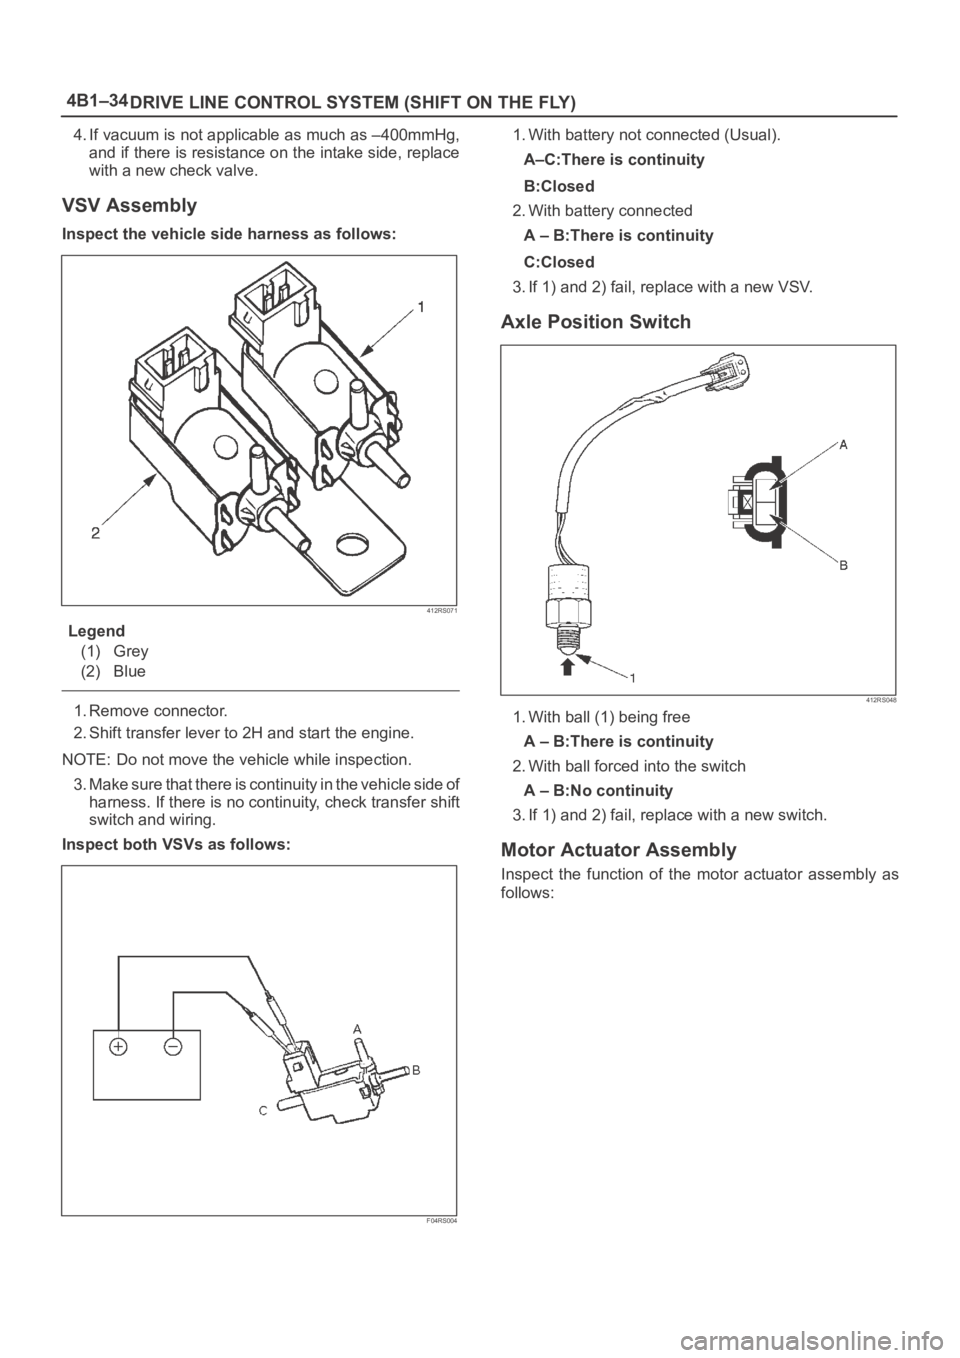 OPEL FRONTERA 1998  Workshop Manual 4B1–34
DRIVE LINE CONTROL SYSTEM (SHIFT ON THE FLY)
4. If vacuum is not applicable as much as –400mmHg,
and if there is resistance on the intake side, replace
with a new check valve.
VSV Assembly
